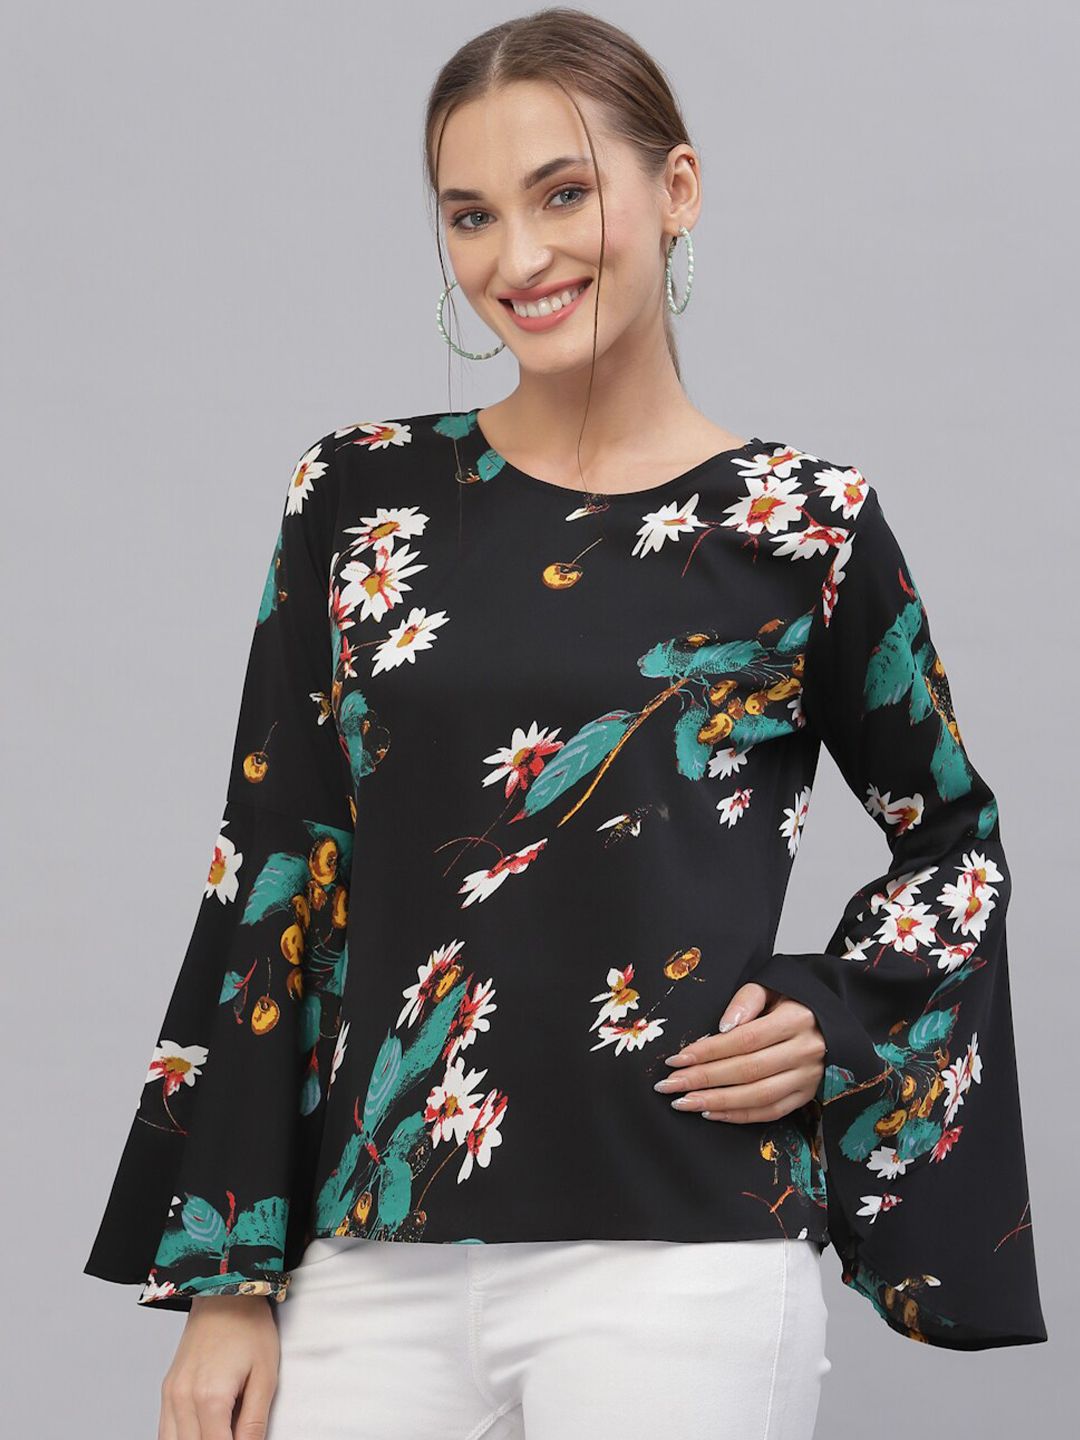 Style Quotient Women Black & Green Floral Printed Bell Sleeves Top Price in India